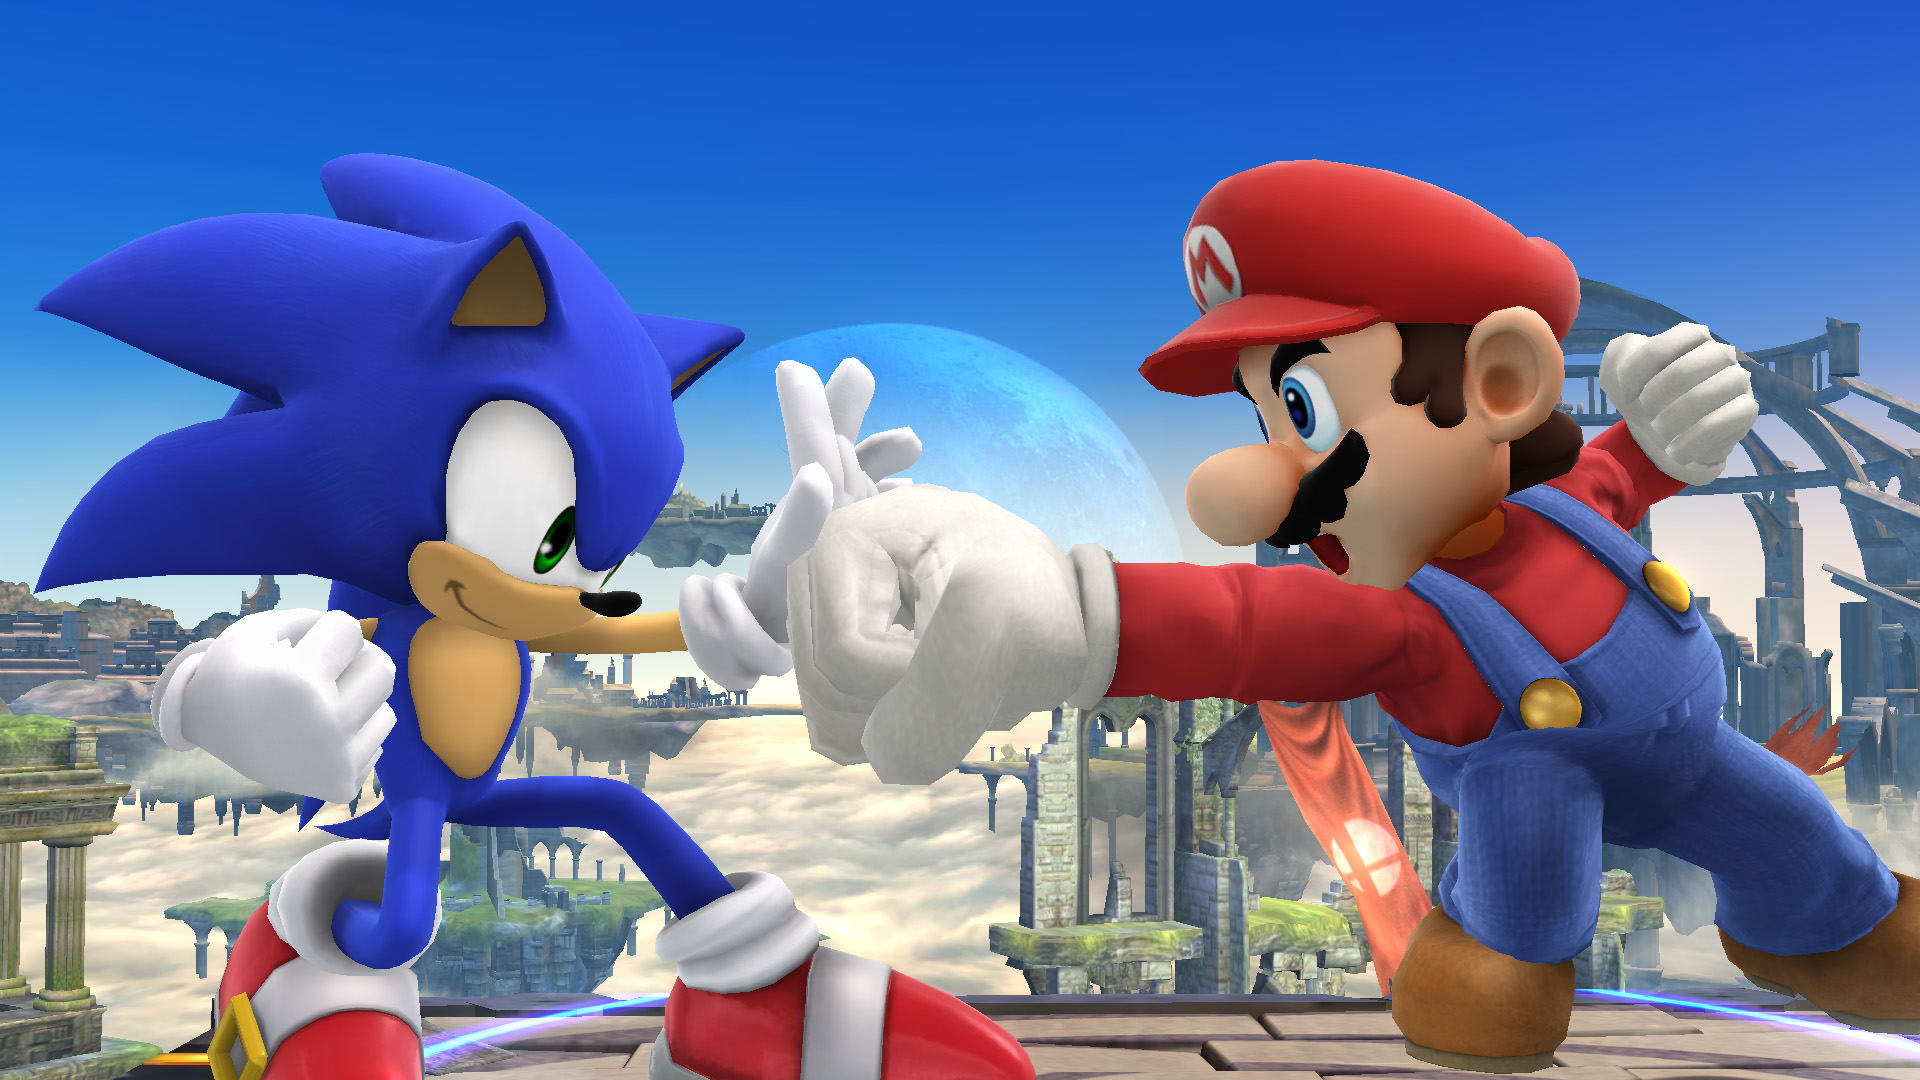 Games Inbox: Is Sonic the Hedgehog better than Super Mario